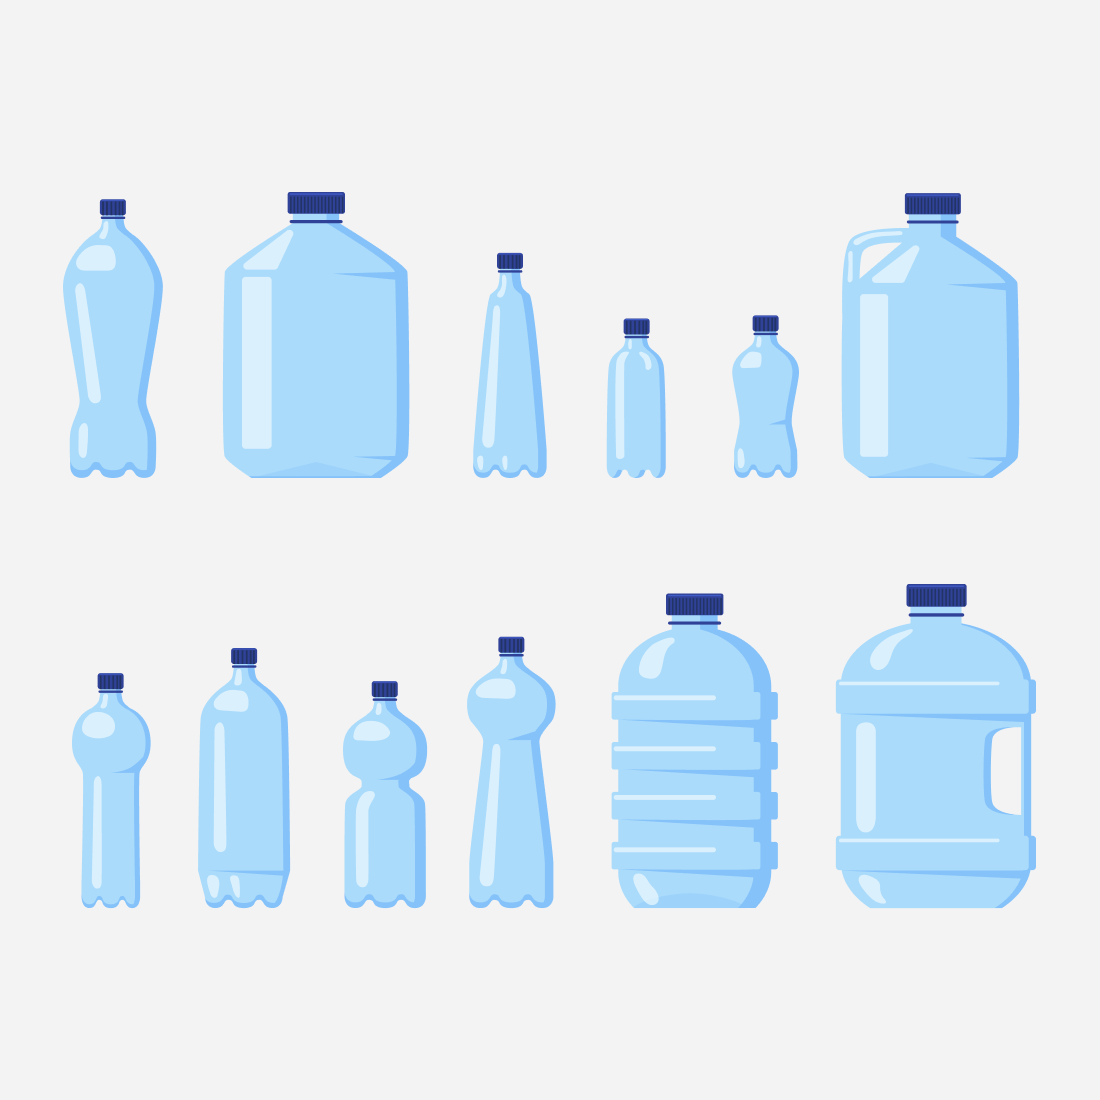 Blue Water Bottles of Different Sizes and Shapes.